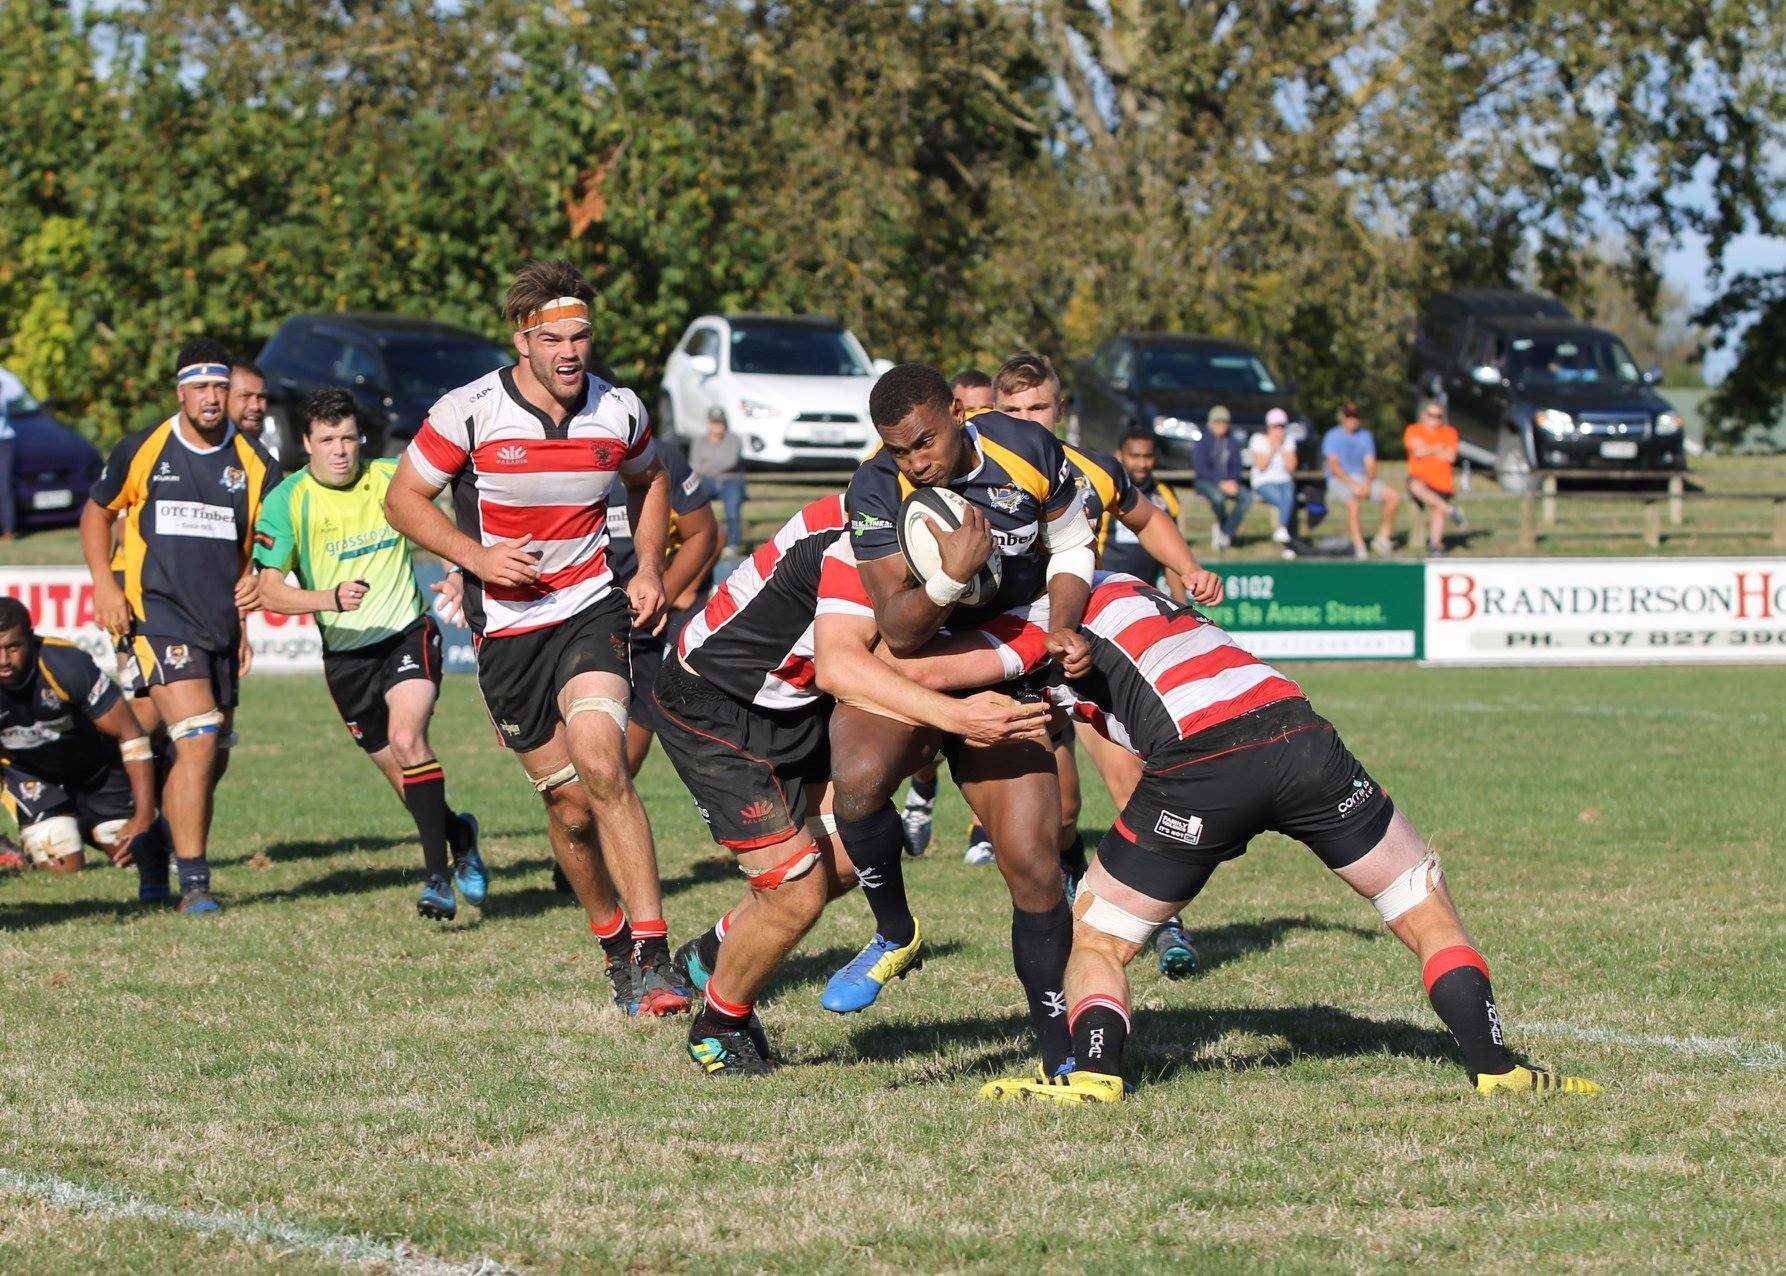 WAIKATO CLUB RUGBY RESULTS 8 JUNE 2019